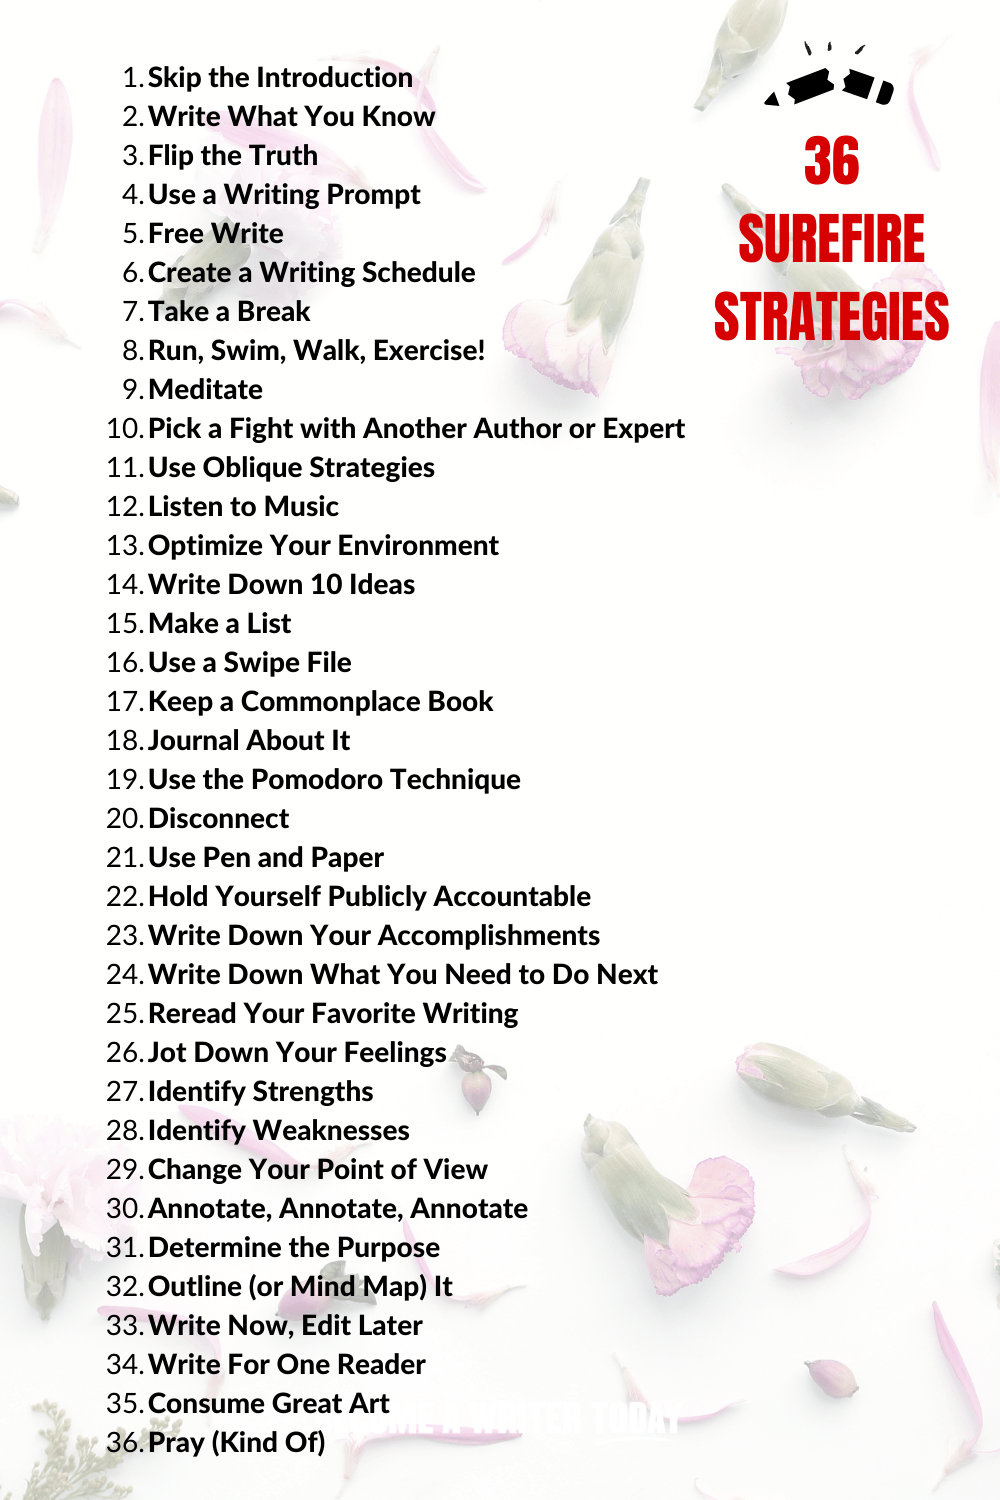 How to Beat Writer’s Block_ 36 Surefire Strategies for 2020 (A Definitive Guide)